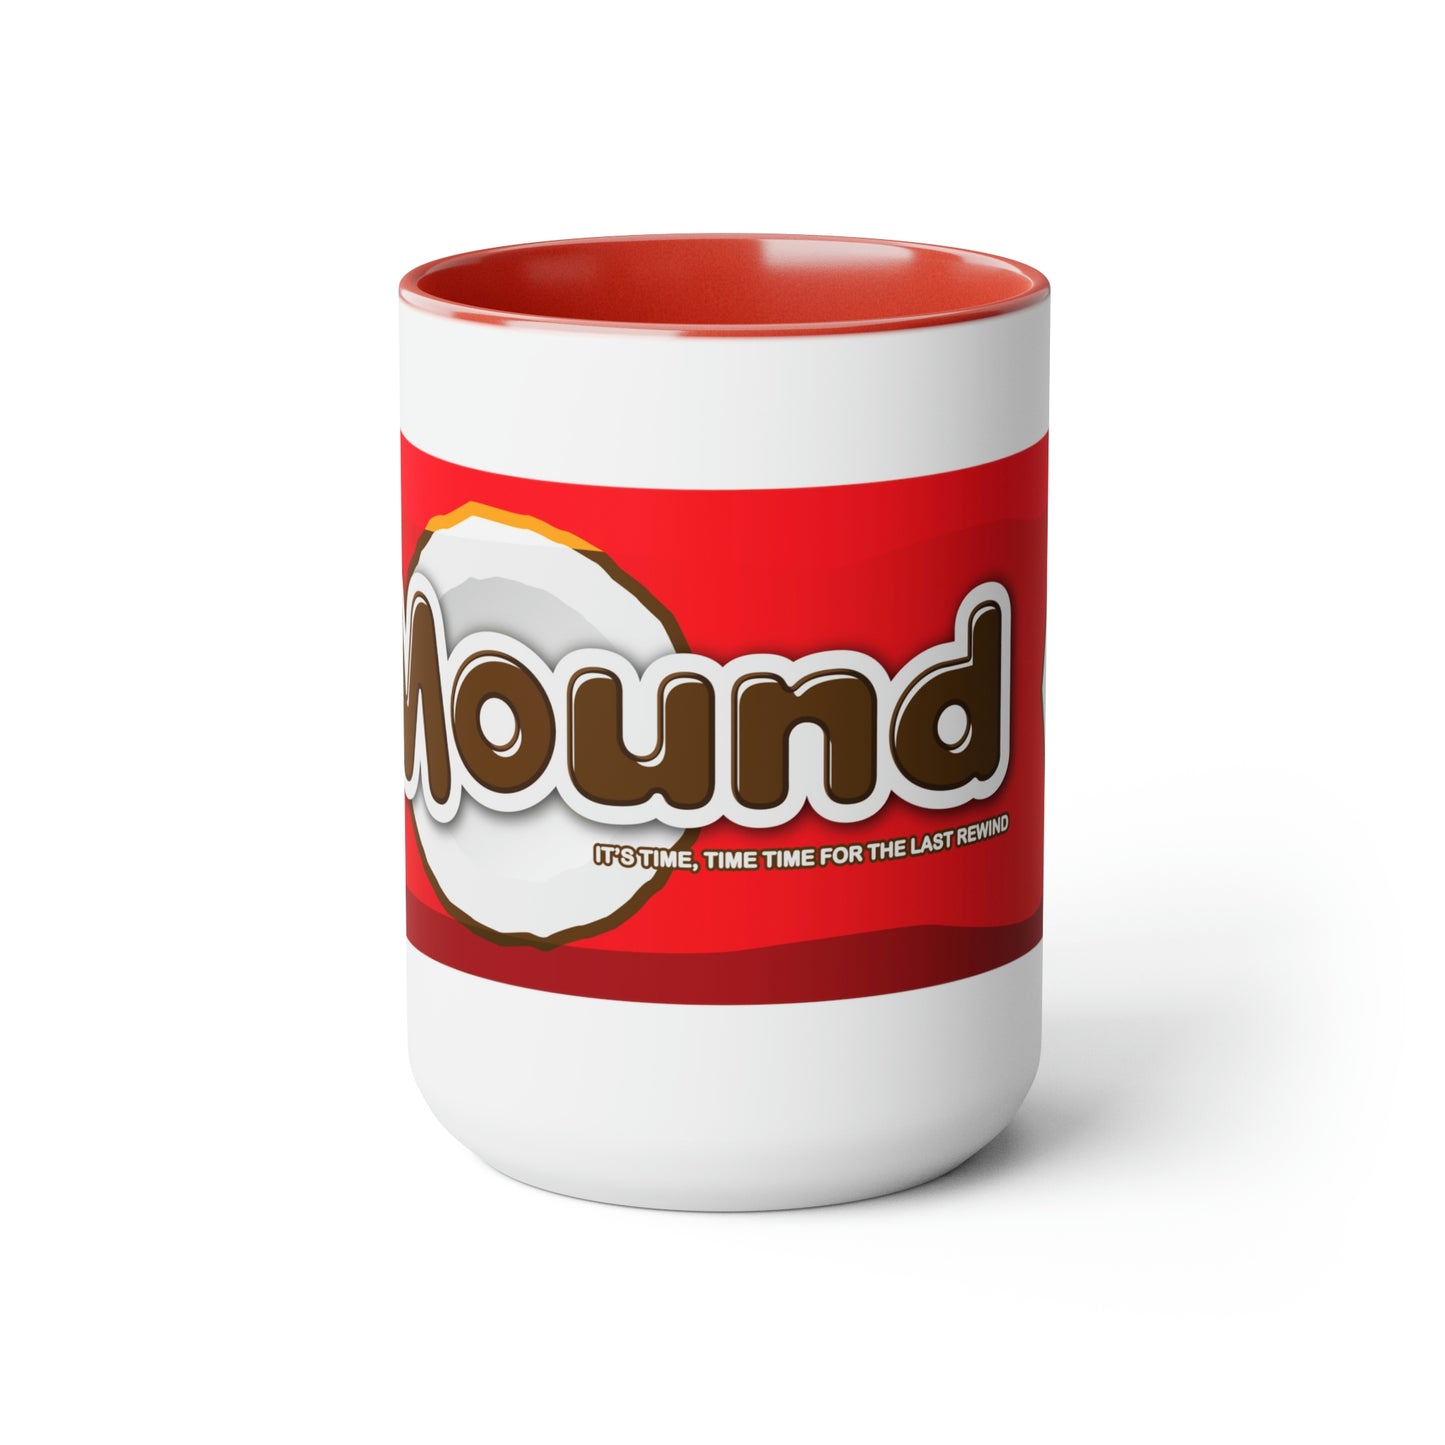 Mound Accented Coffee Mugs, 15oz